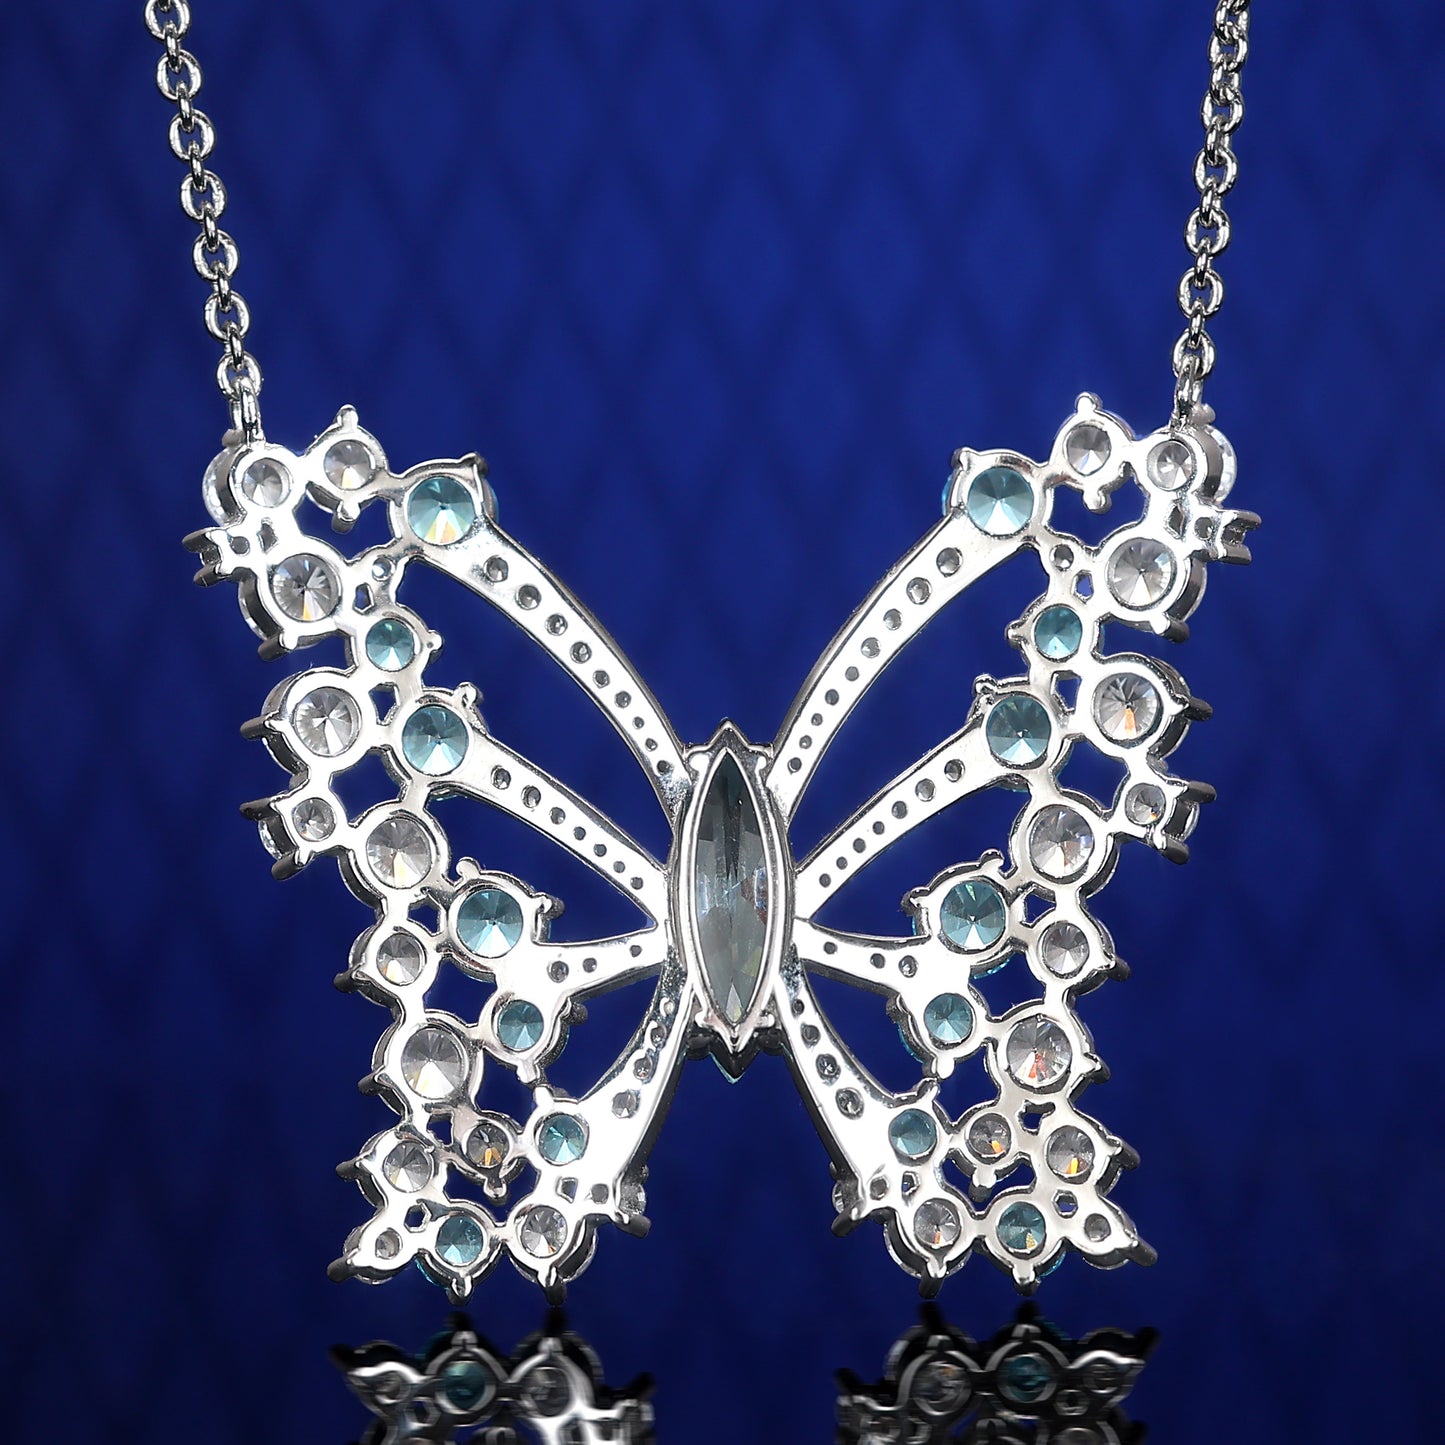 Micro-setting Aquamarine color Lab created stones Dream butterfly necklace, sterling silver